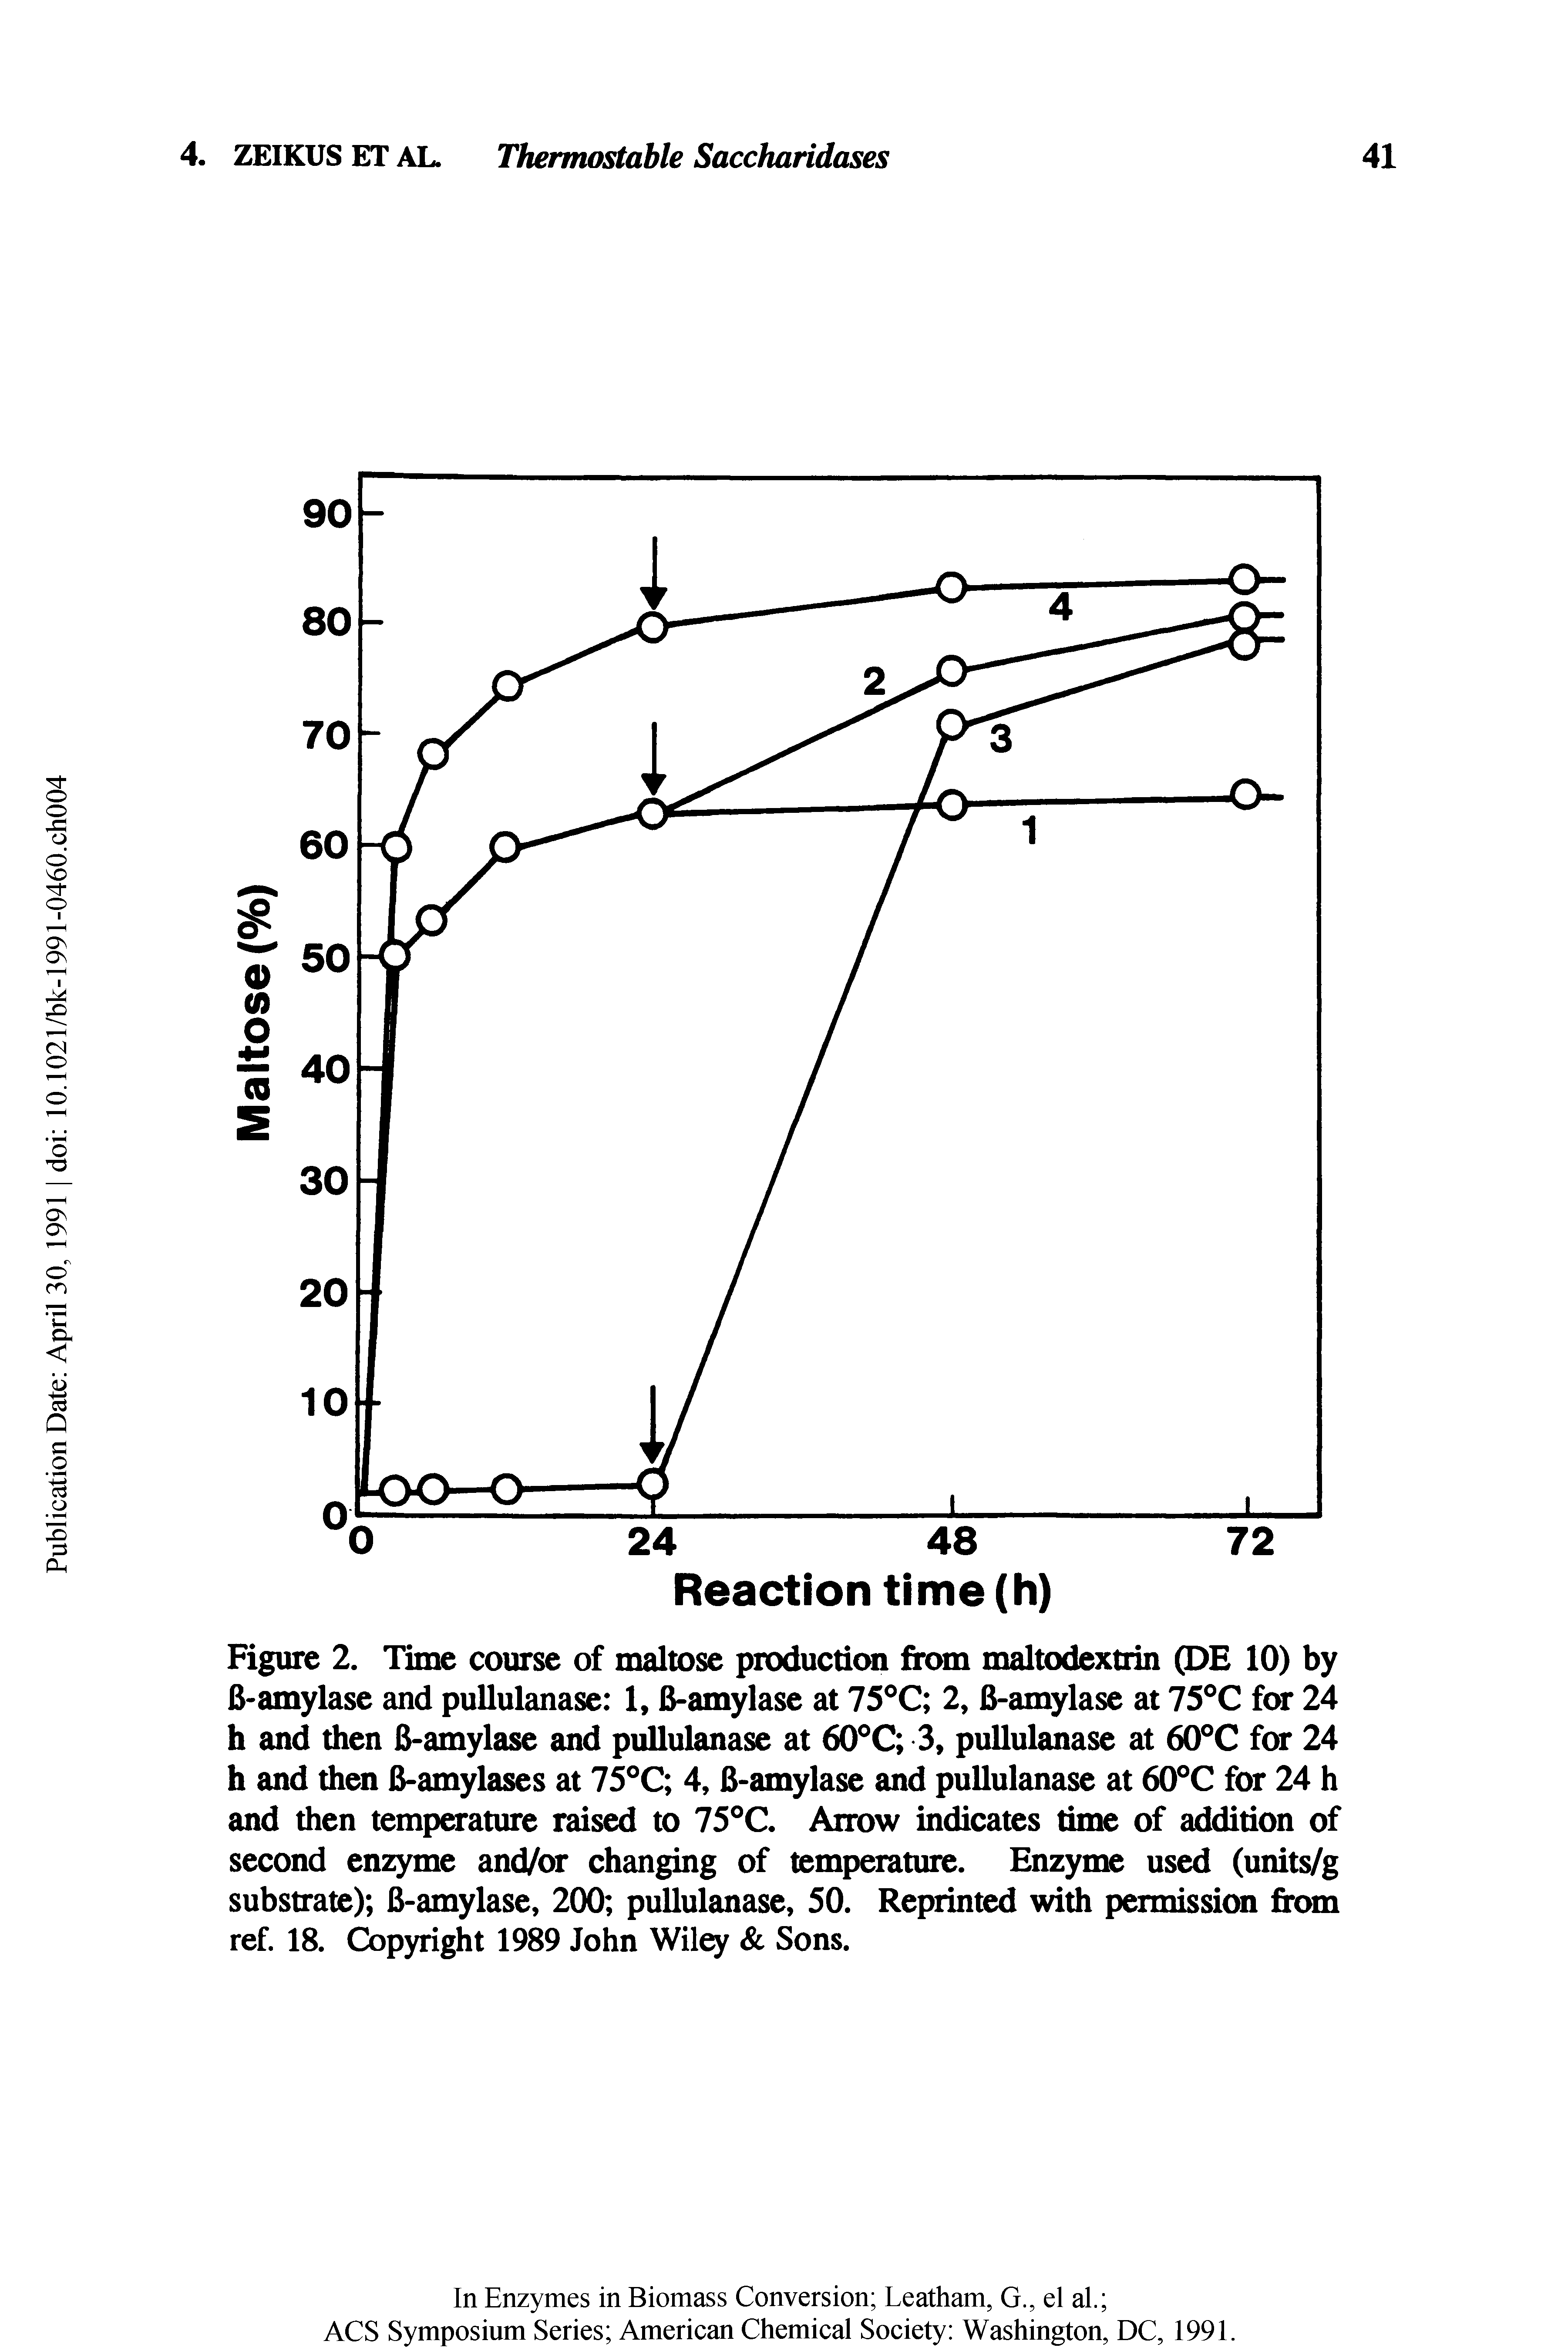 Figure 2. Time course of maltose production from maltodextrin (DE 10) by B-amylase and puUulanase 1,6-amylase at 75 C 2, 6-amylase at 75 C for 24 h and then 6-amylase and puUulanase at 60 C 3, puUulanase at 60°C for 24 h and then 6-amylases at 75°C 4, 6-amylase and puUulanase at 60°C for 24 h and then temperature raised to 75°C. Arrow indicates time of addition of second enzyme and/or changing of temperature. Enzyme used (units/g substrate) 6-amylase, 200 puUulanase, 50. Reprinted with permission from ref. 18. Copyright 1989 John Wil r Sons.